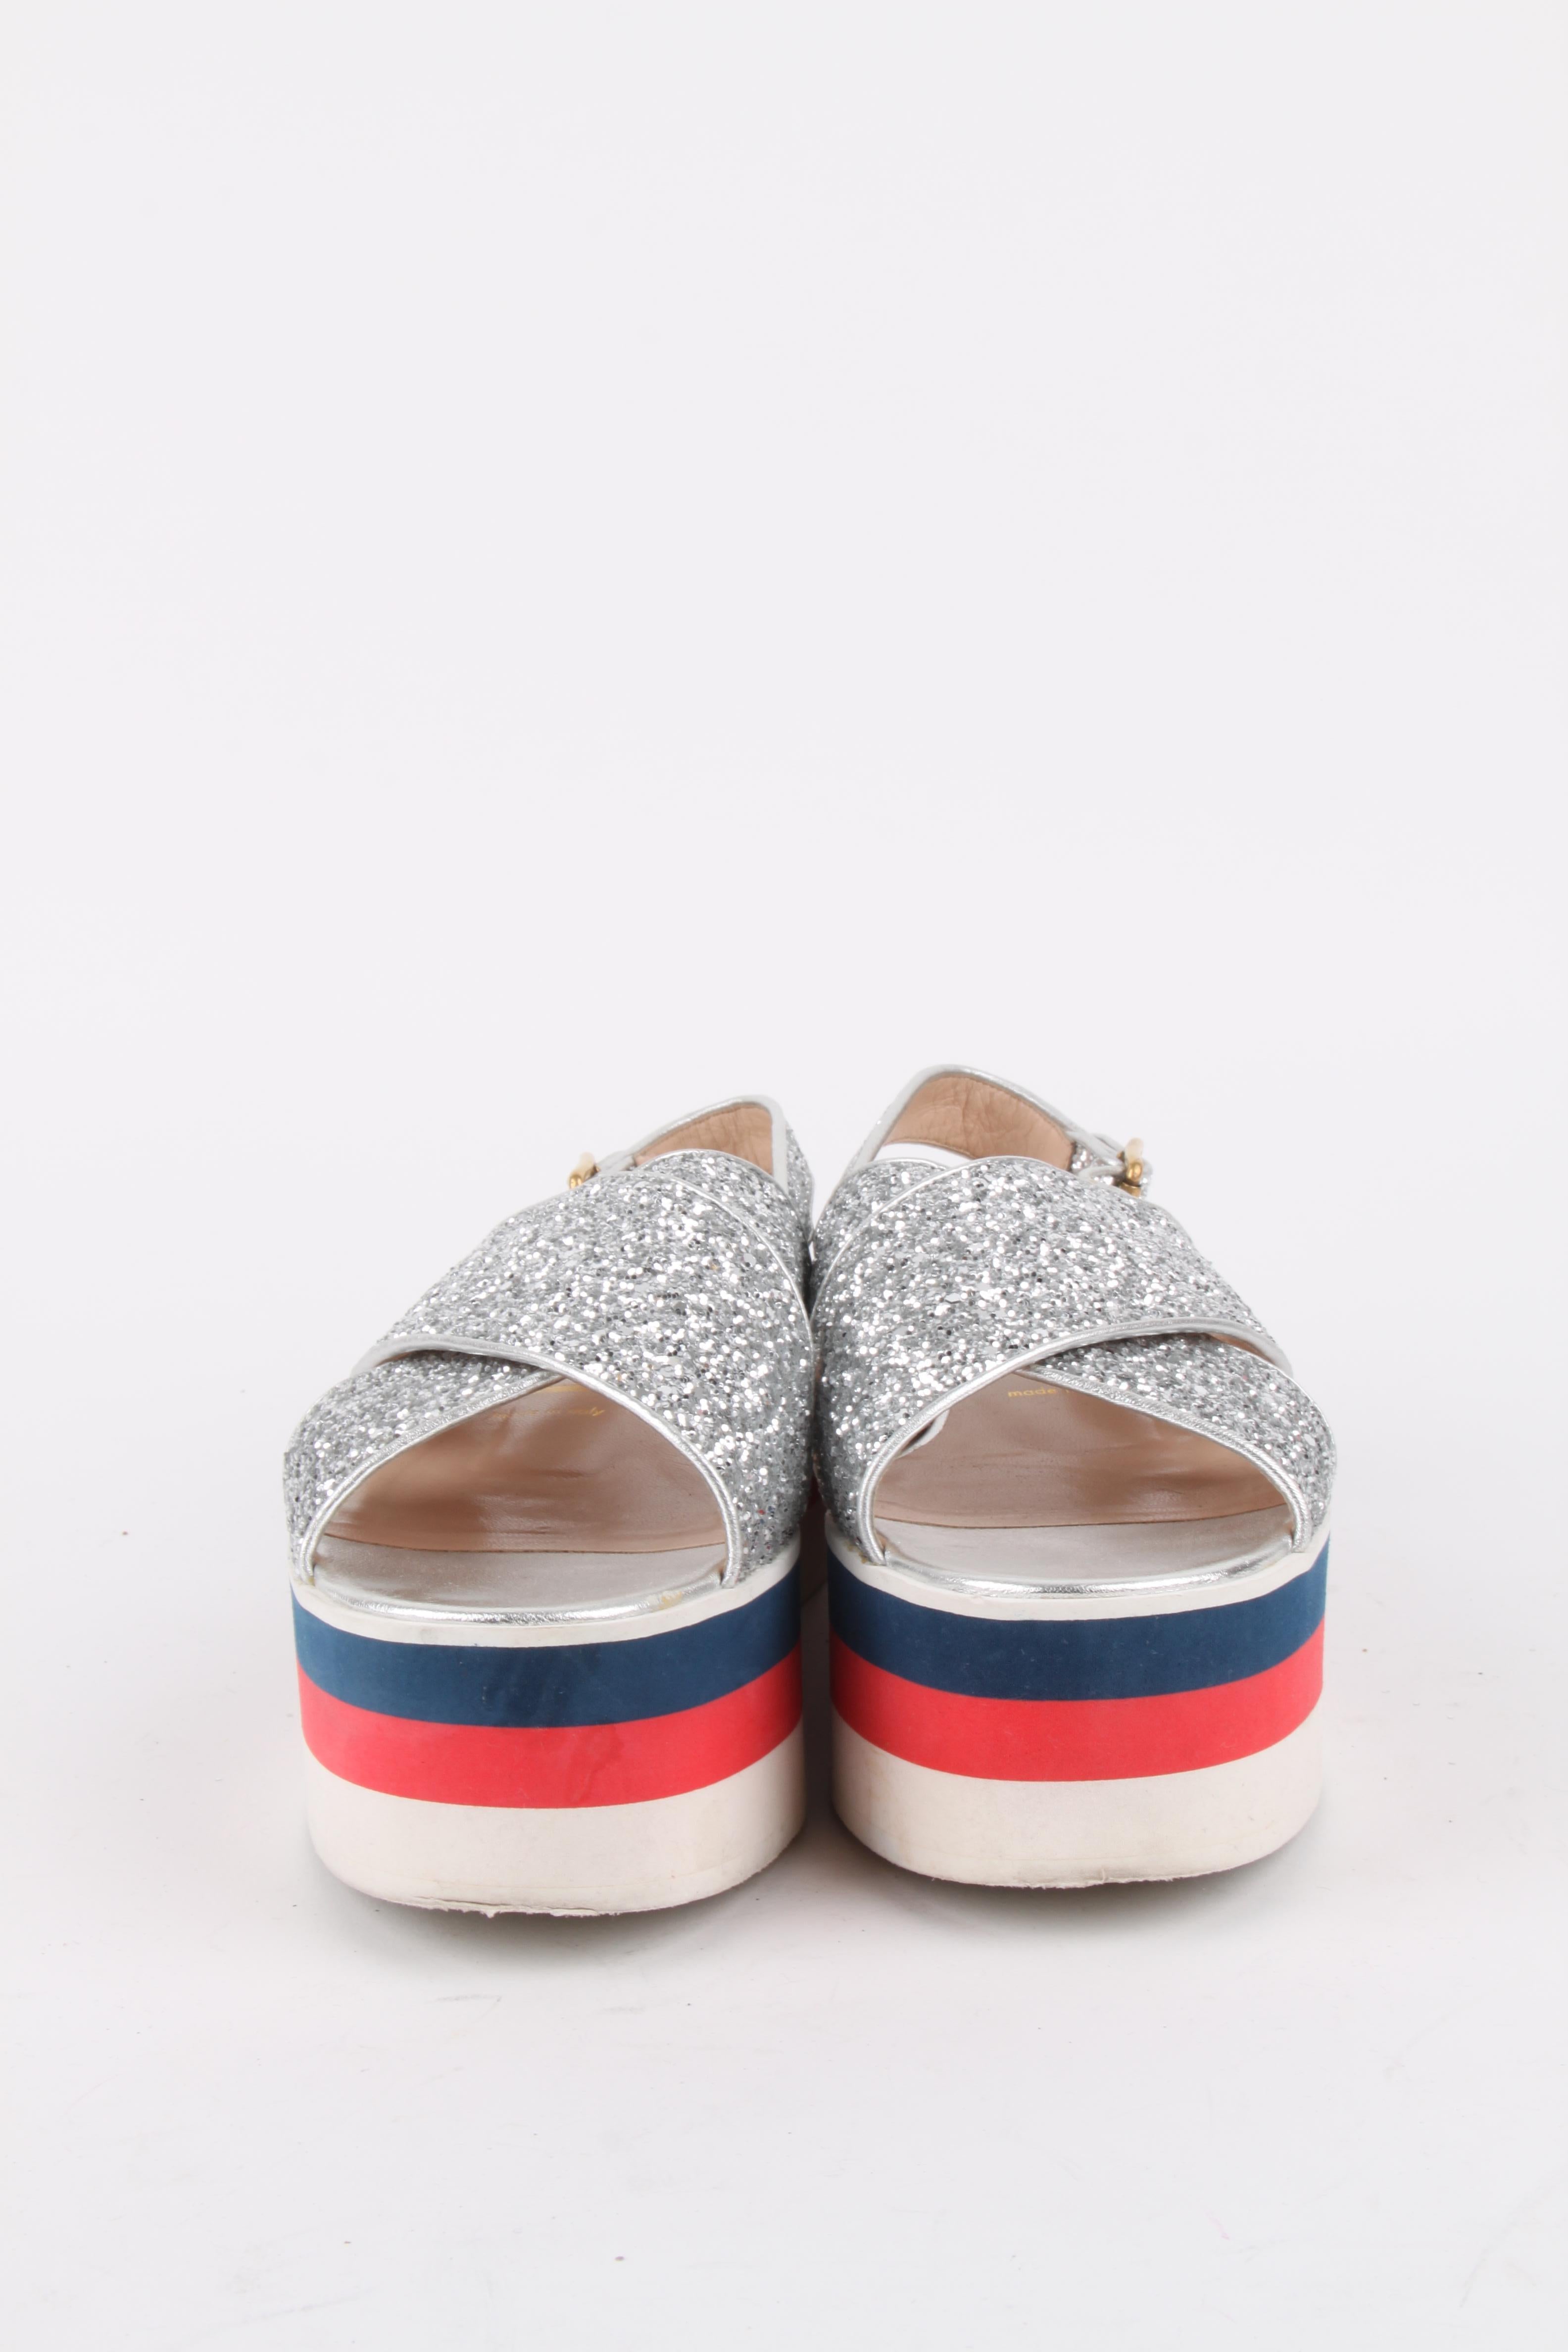 Gucci Glitter Crossover Patform Sandals

Silver glitter with metallic silver leather trim
Red, blue and white platform
Crossover front
Adjustable ankle strap closure
Size: 38,5.

Meaurements: Heel : 5cm / 2 inch  / In-sole: 25 cm / 9,8 inch.